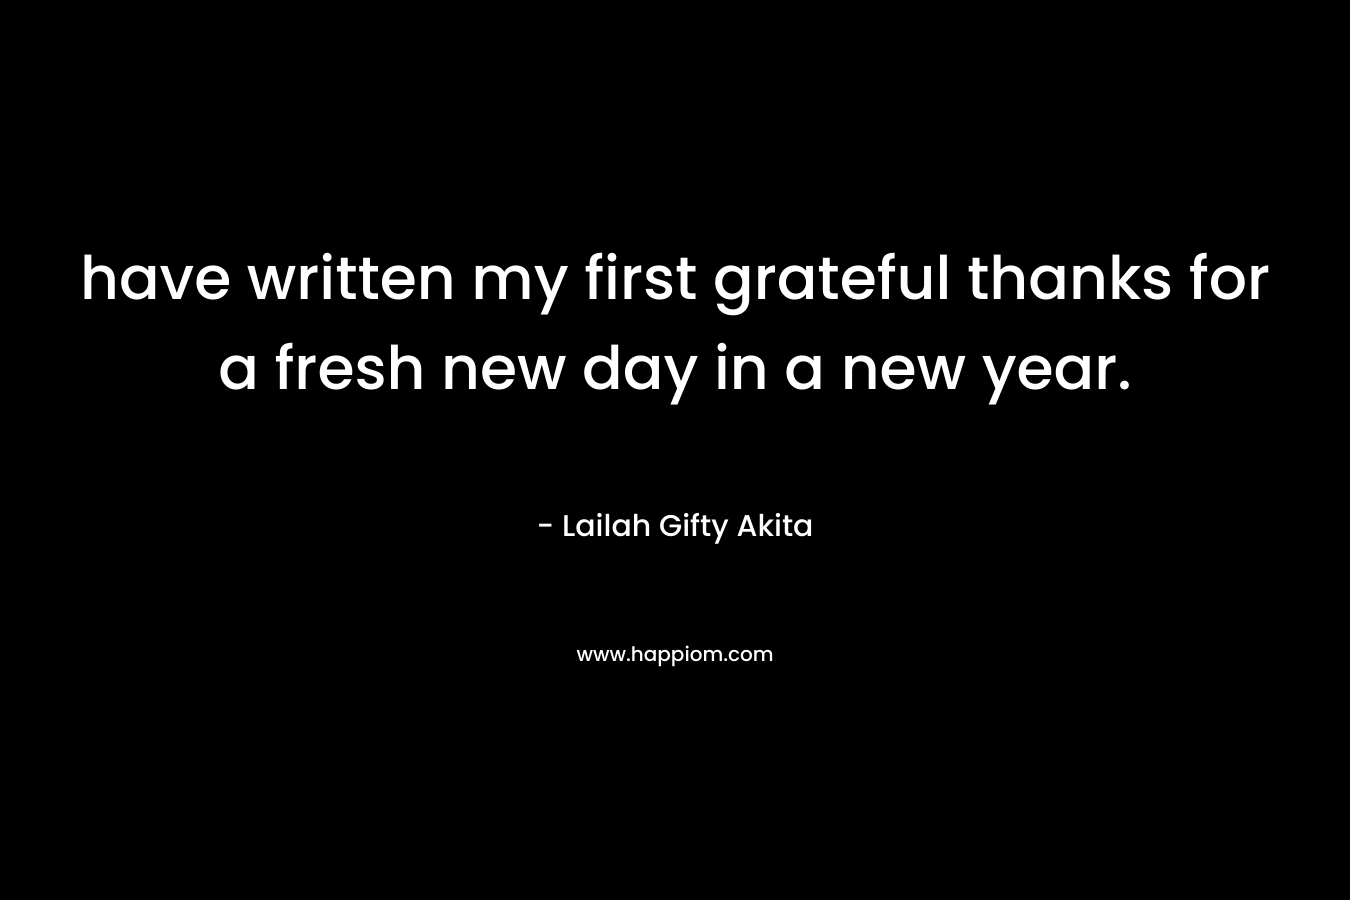 have written my first grateful thanks for a fresh new day in a new year.